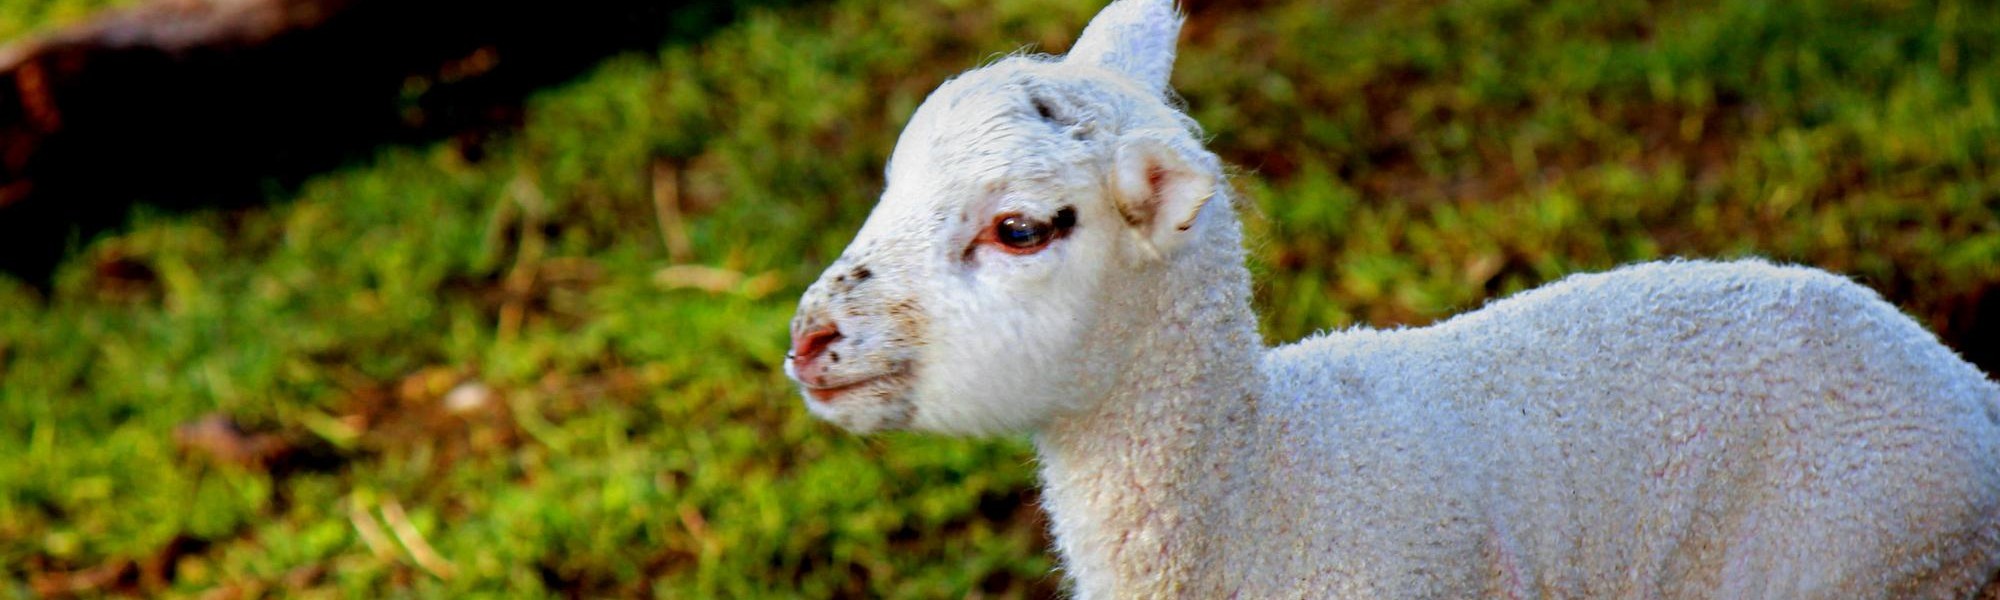 Feed an adorable orphan lamb at Wilderness Lodge on New Zealand's West Coast.